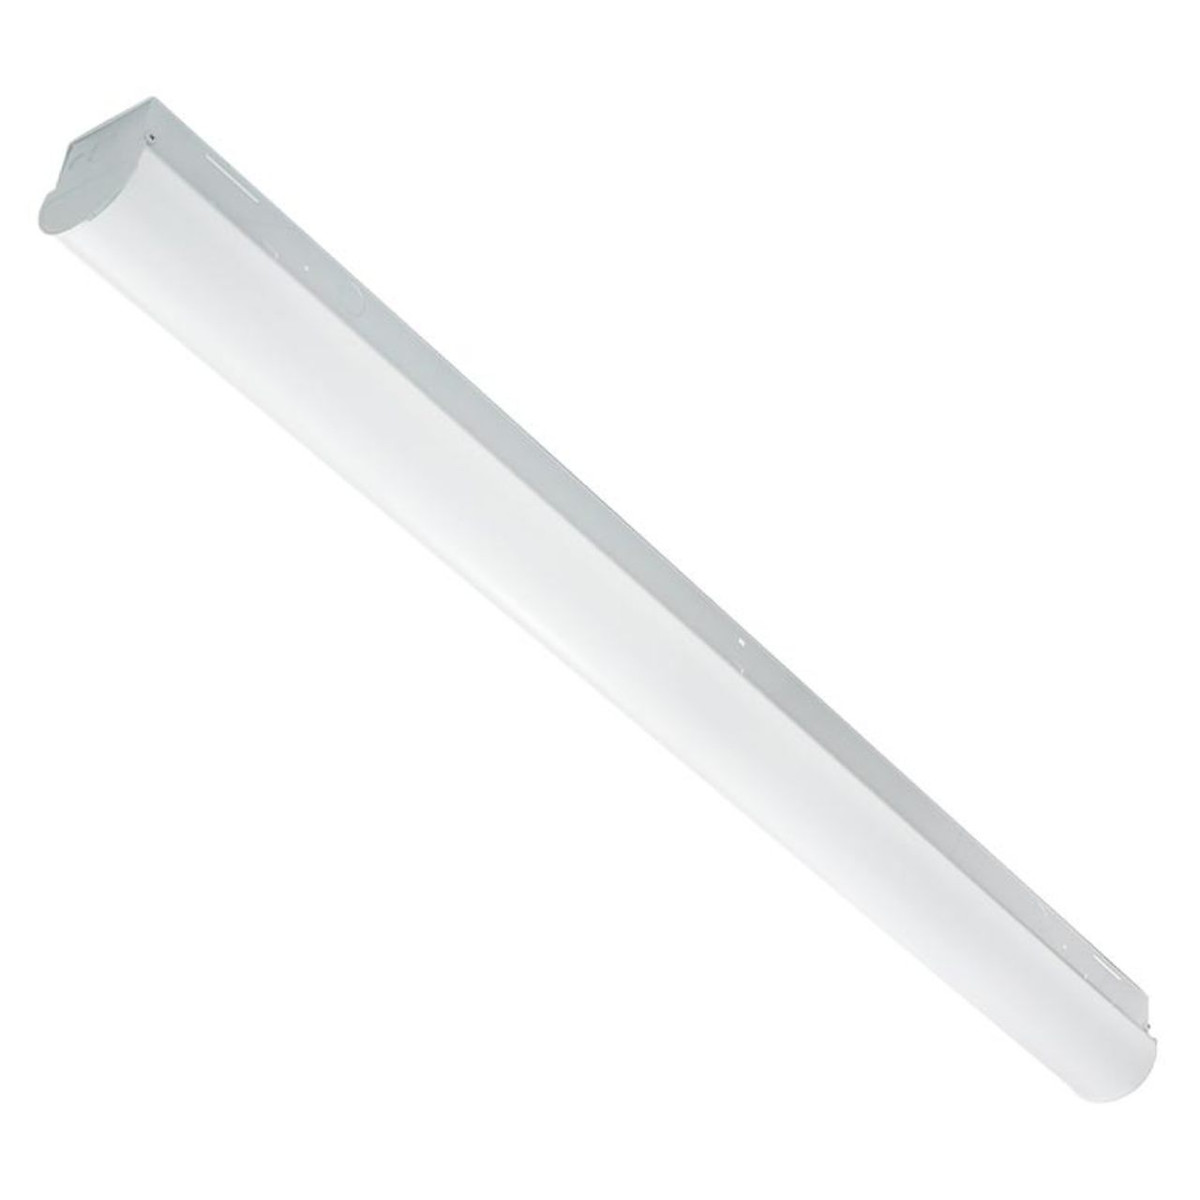 LED Wattage Adjustable & Color Tunable Linear Strip Light - 34W/38W/45W Dimmable - Euri Lighting